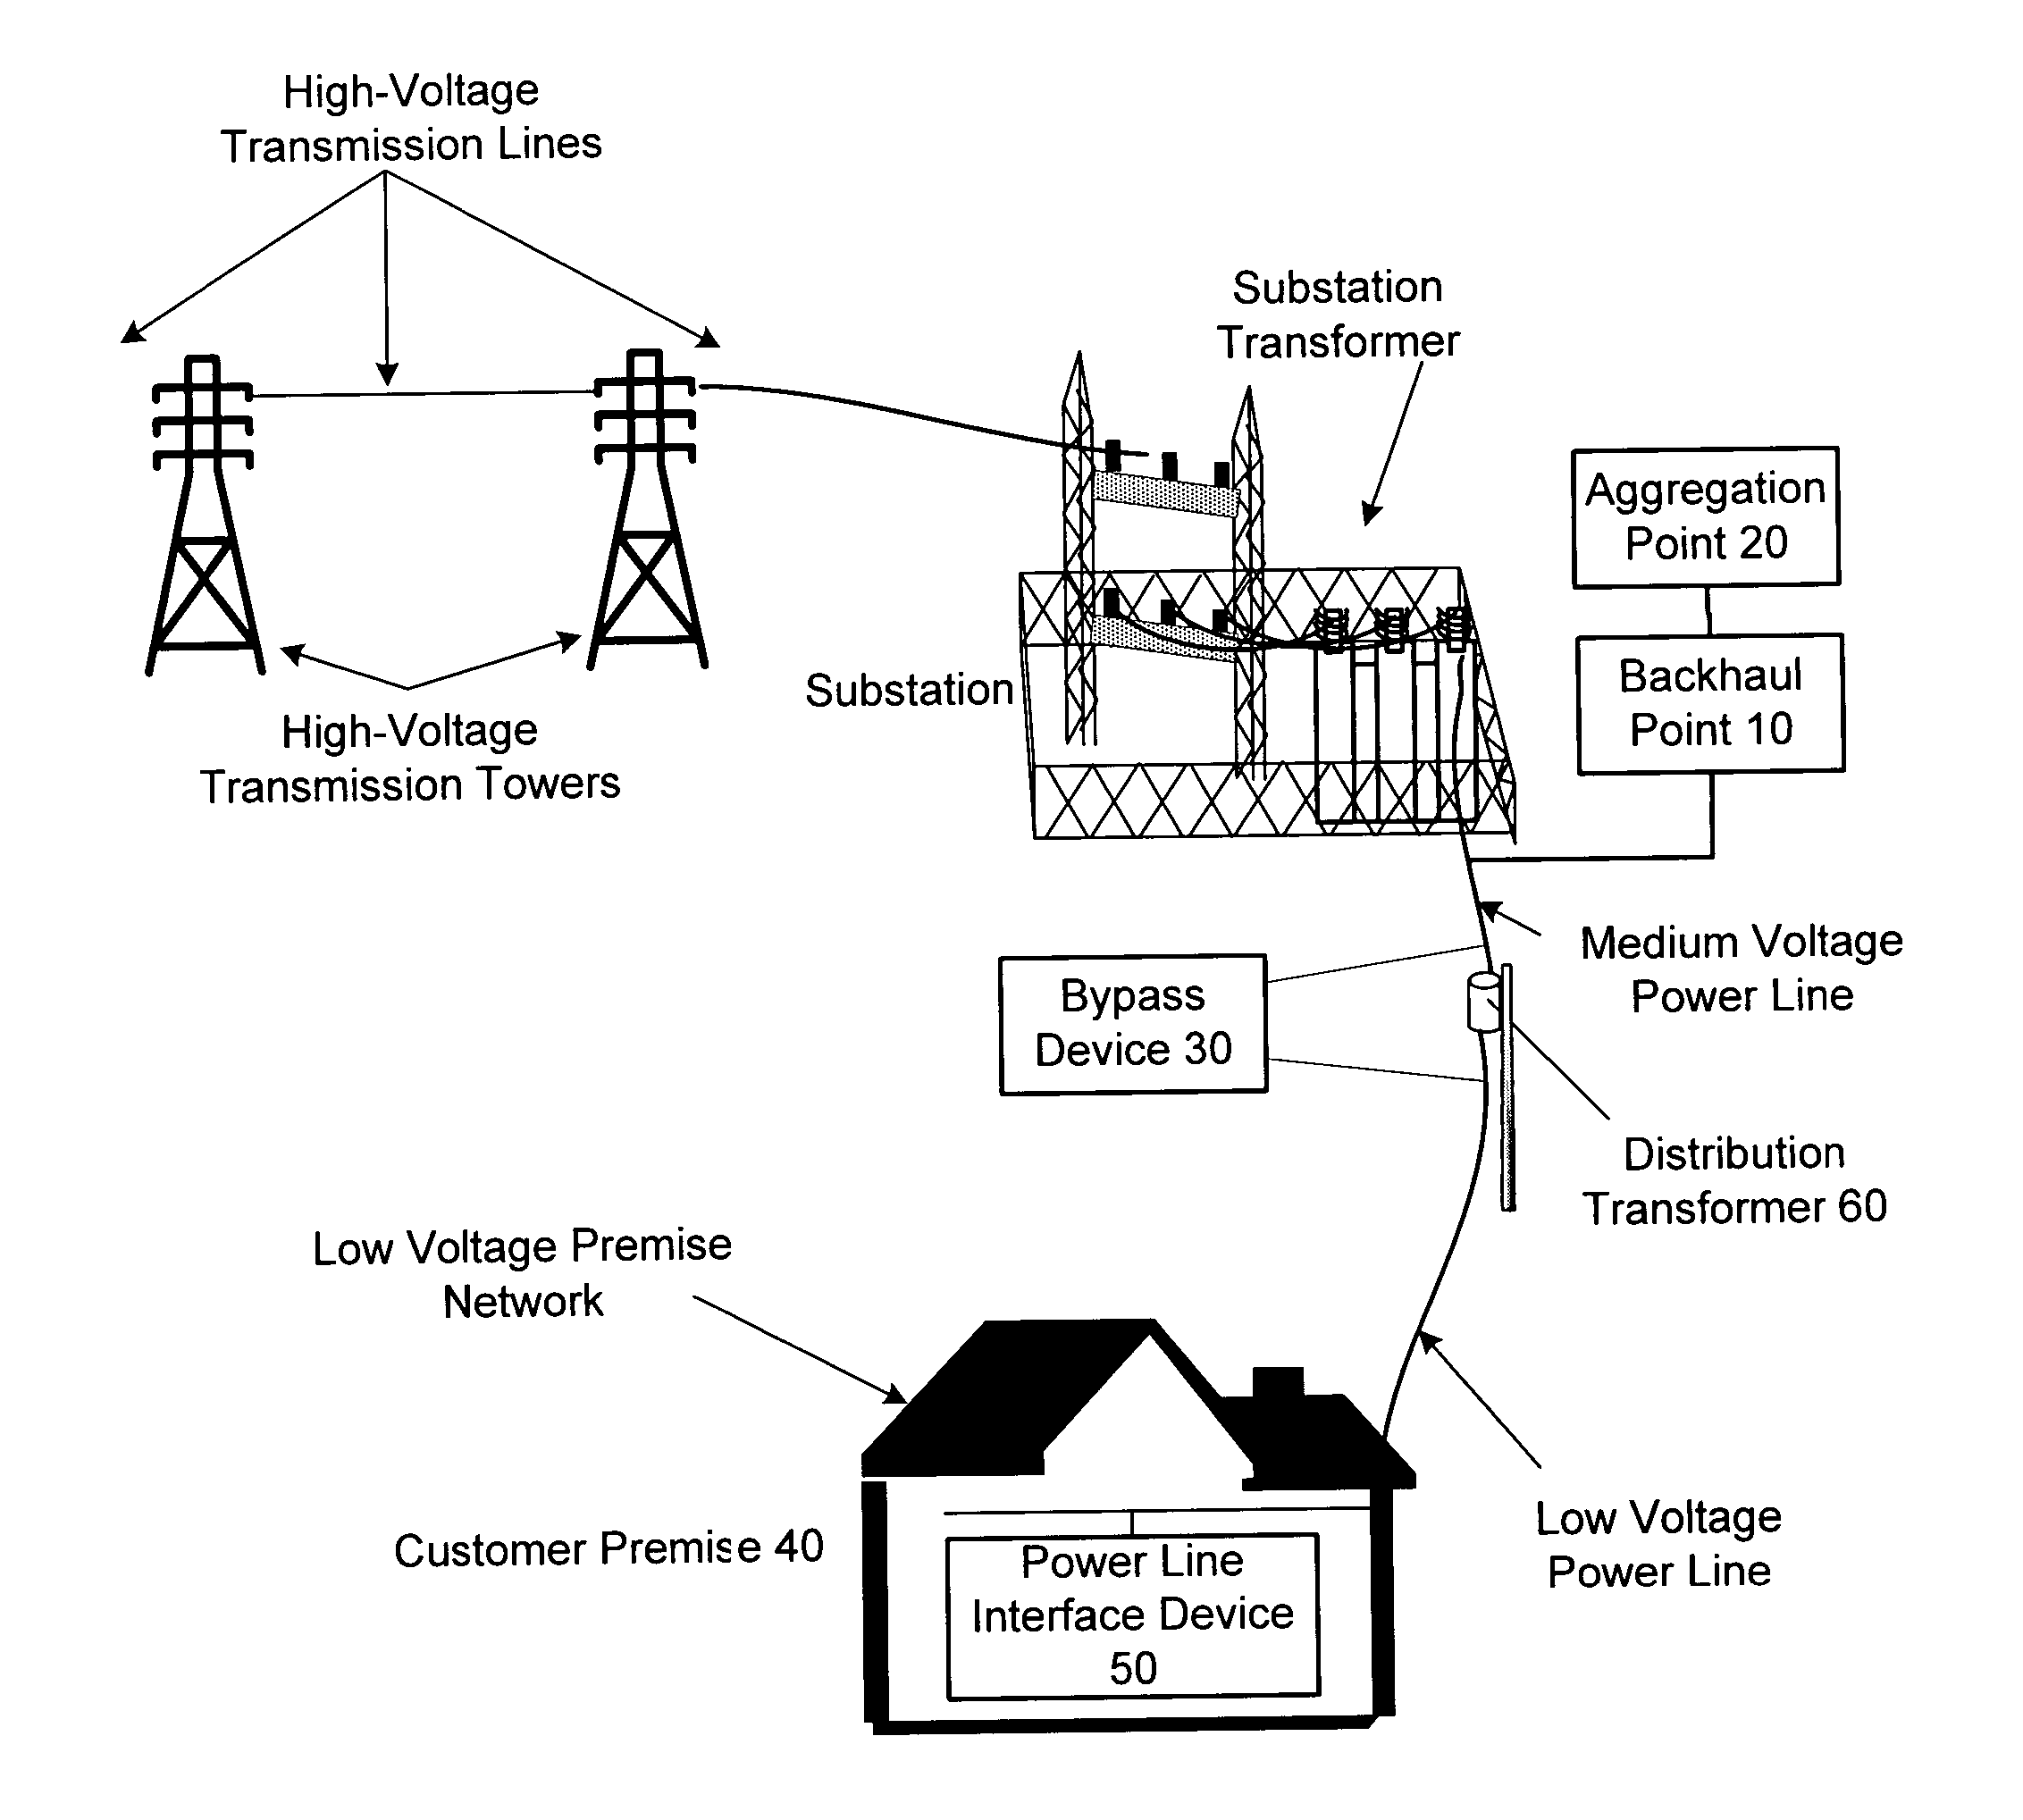 Power line communication apparatus and method of using the same